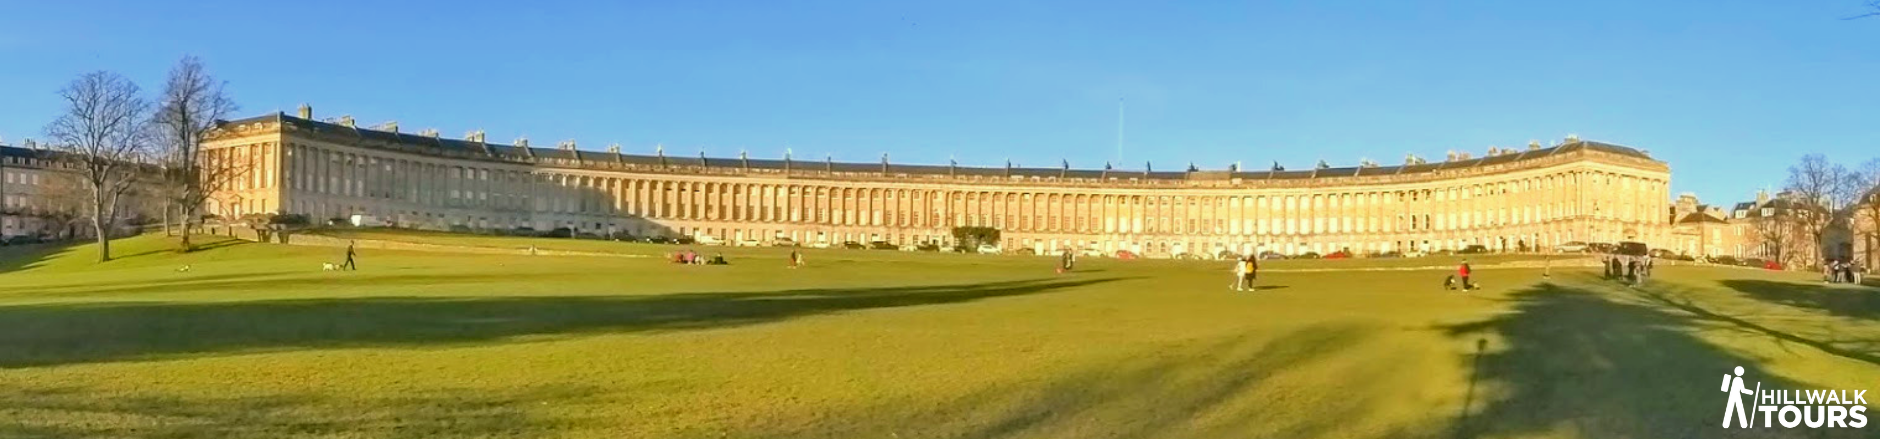 Royal Crescent - Cotswold Way